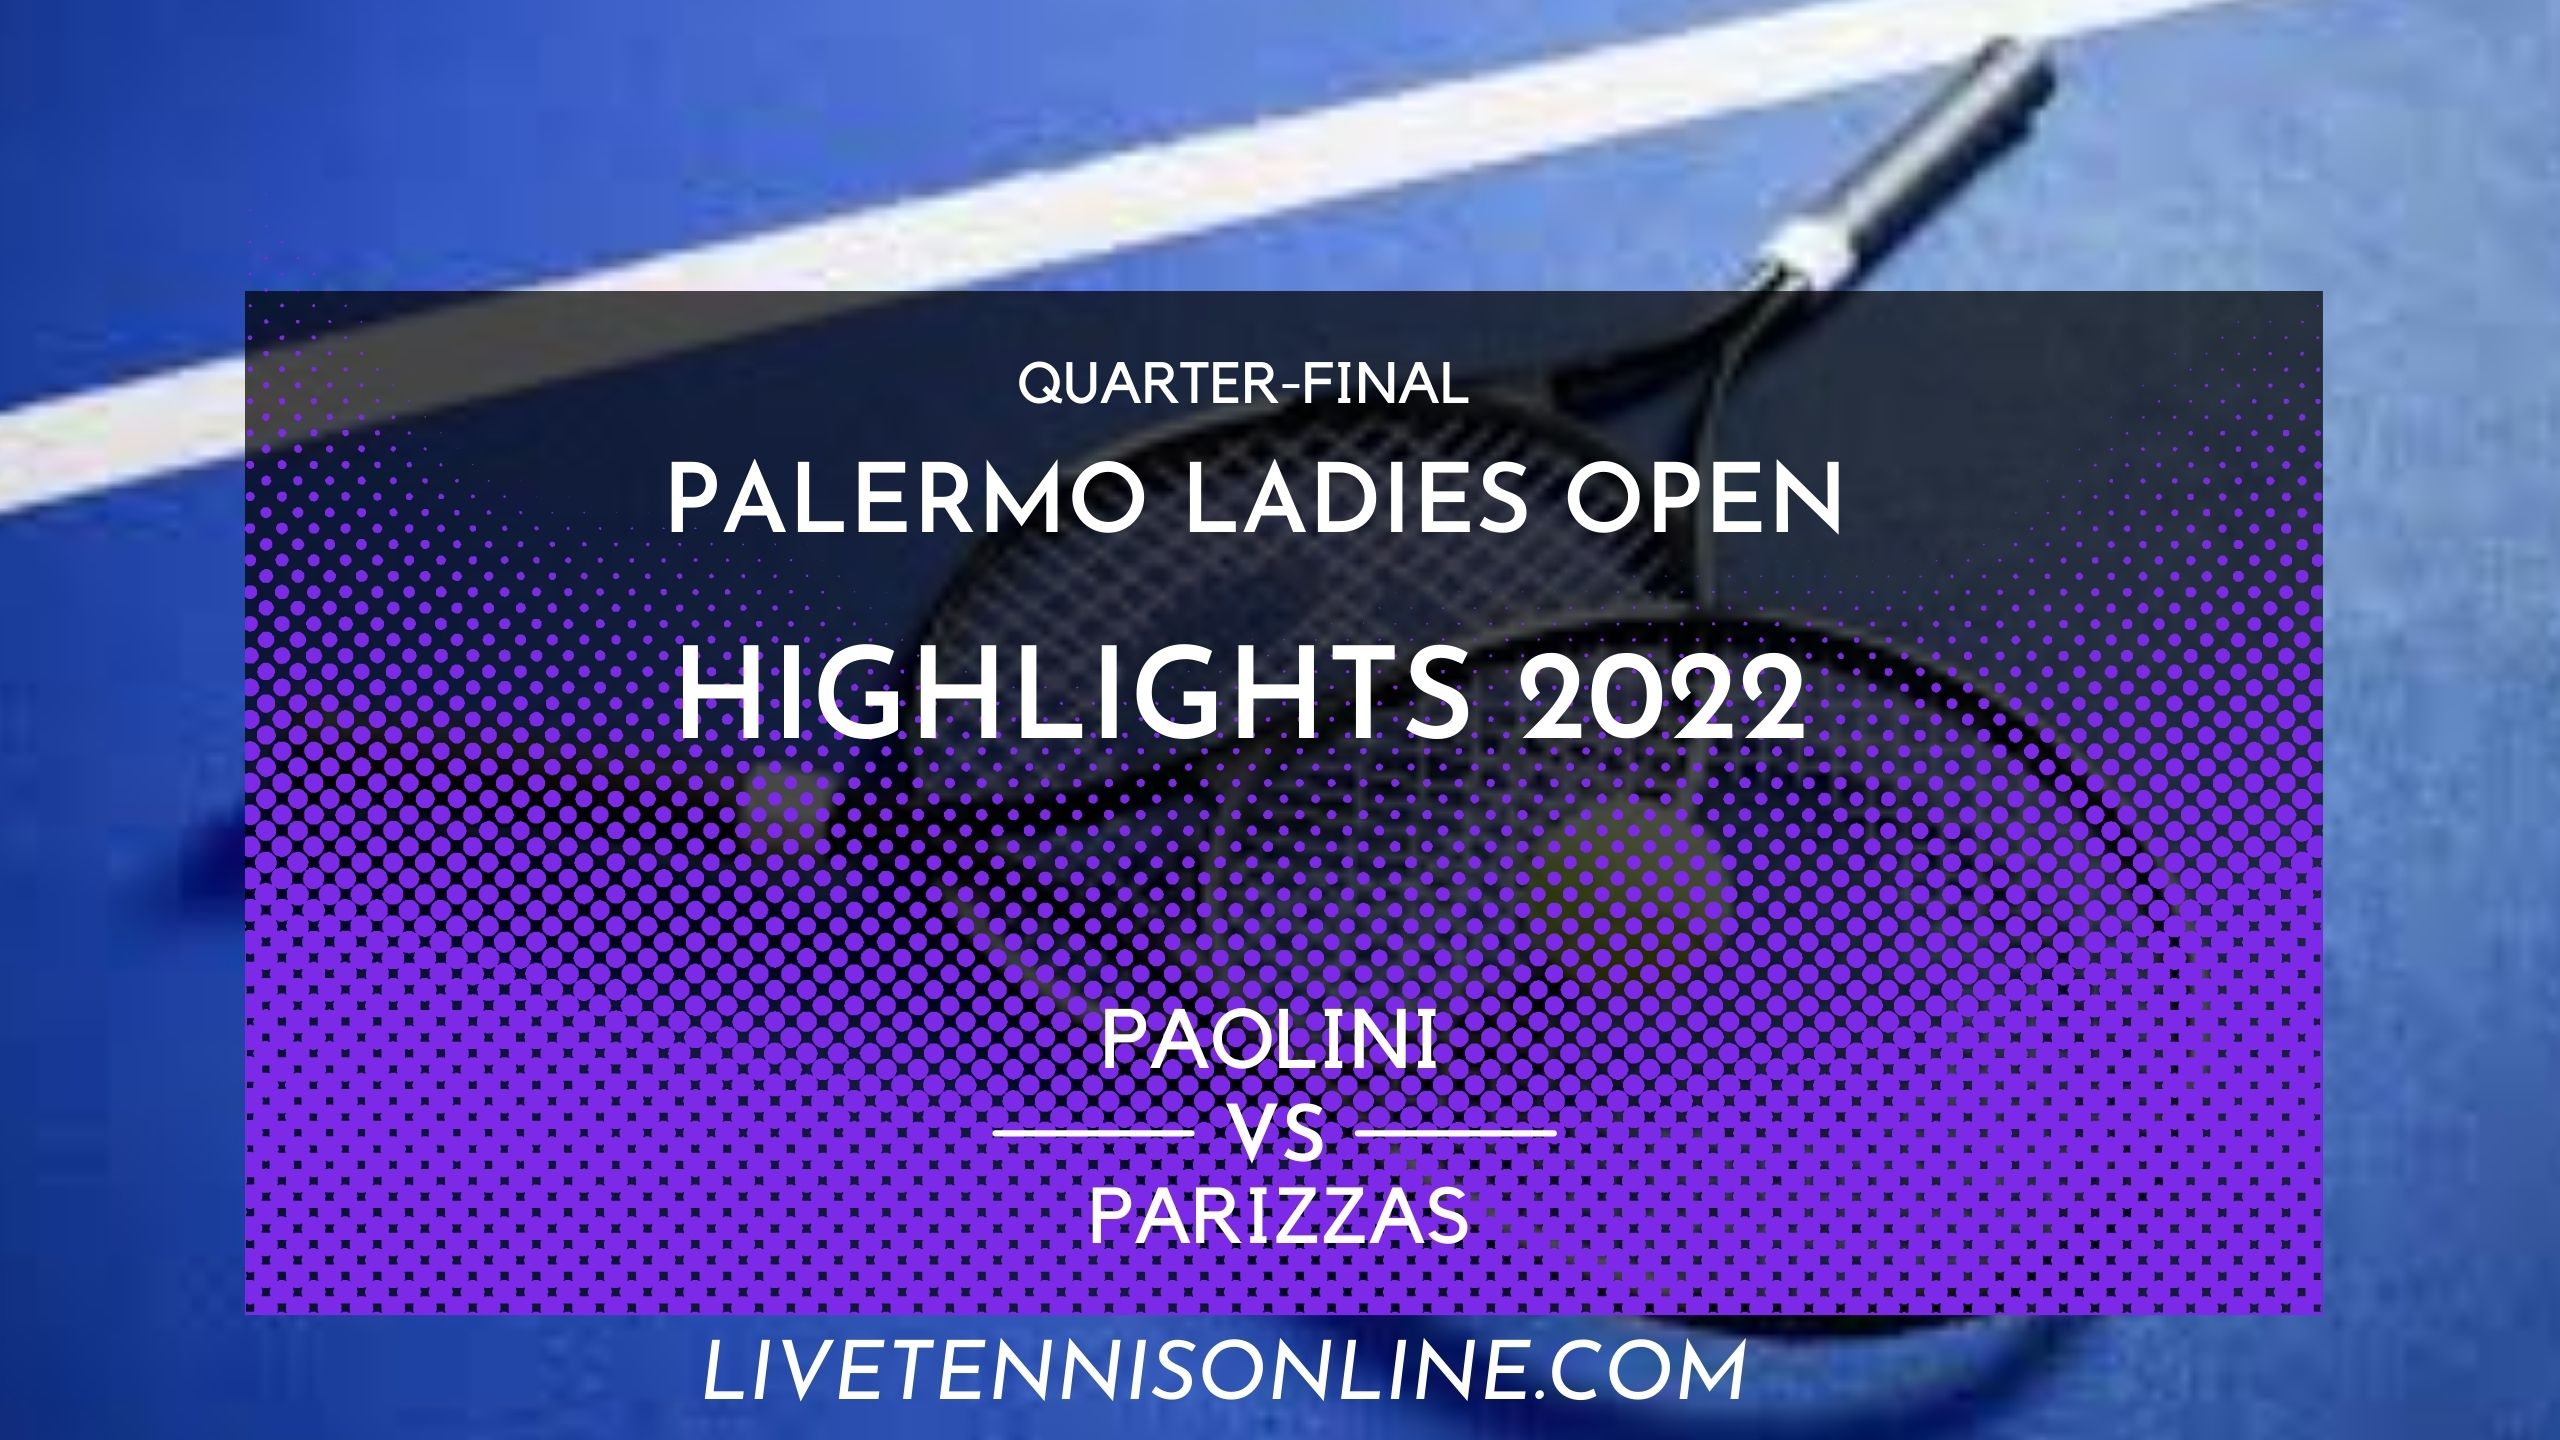 Paolini Vs Parrizas QF Highlights 2022 Palermo Ladies Open